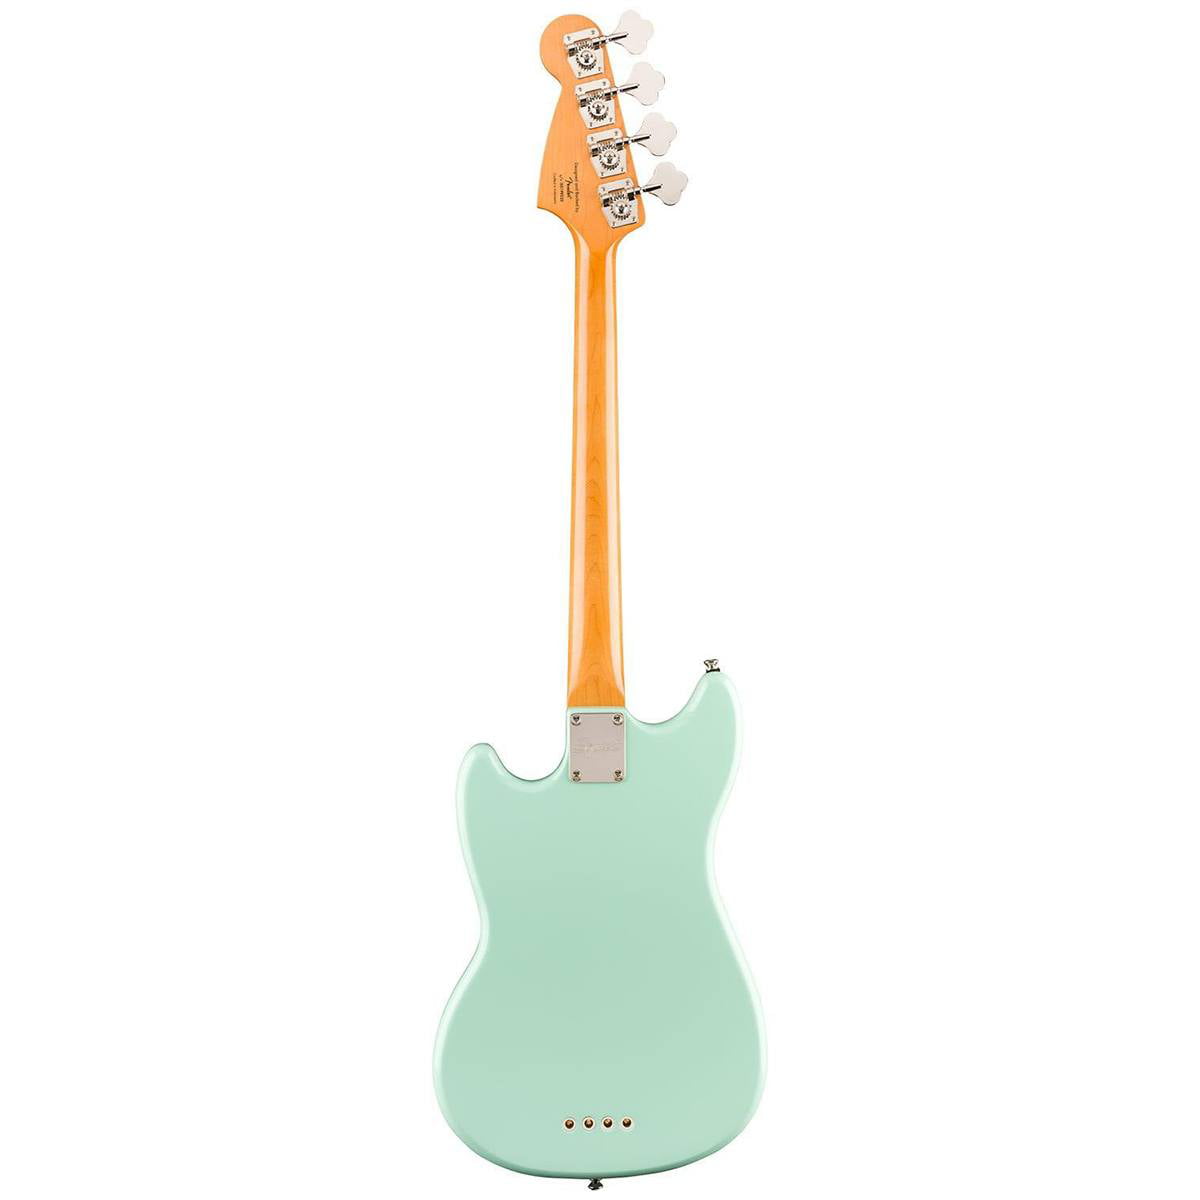 Squier Classic Vibe '60s Mustang Bass Guitar (Surf Green)